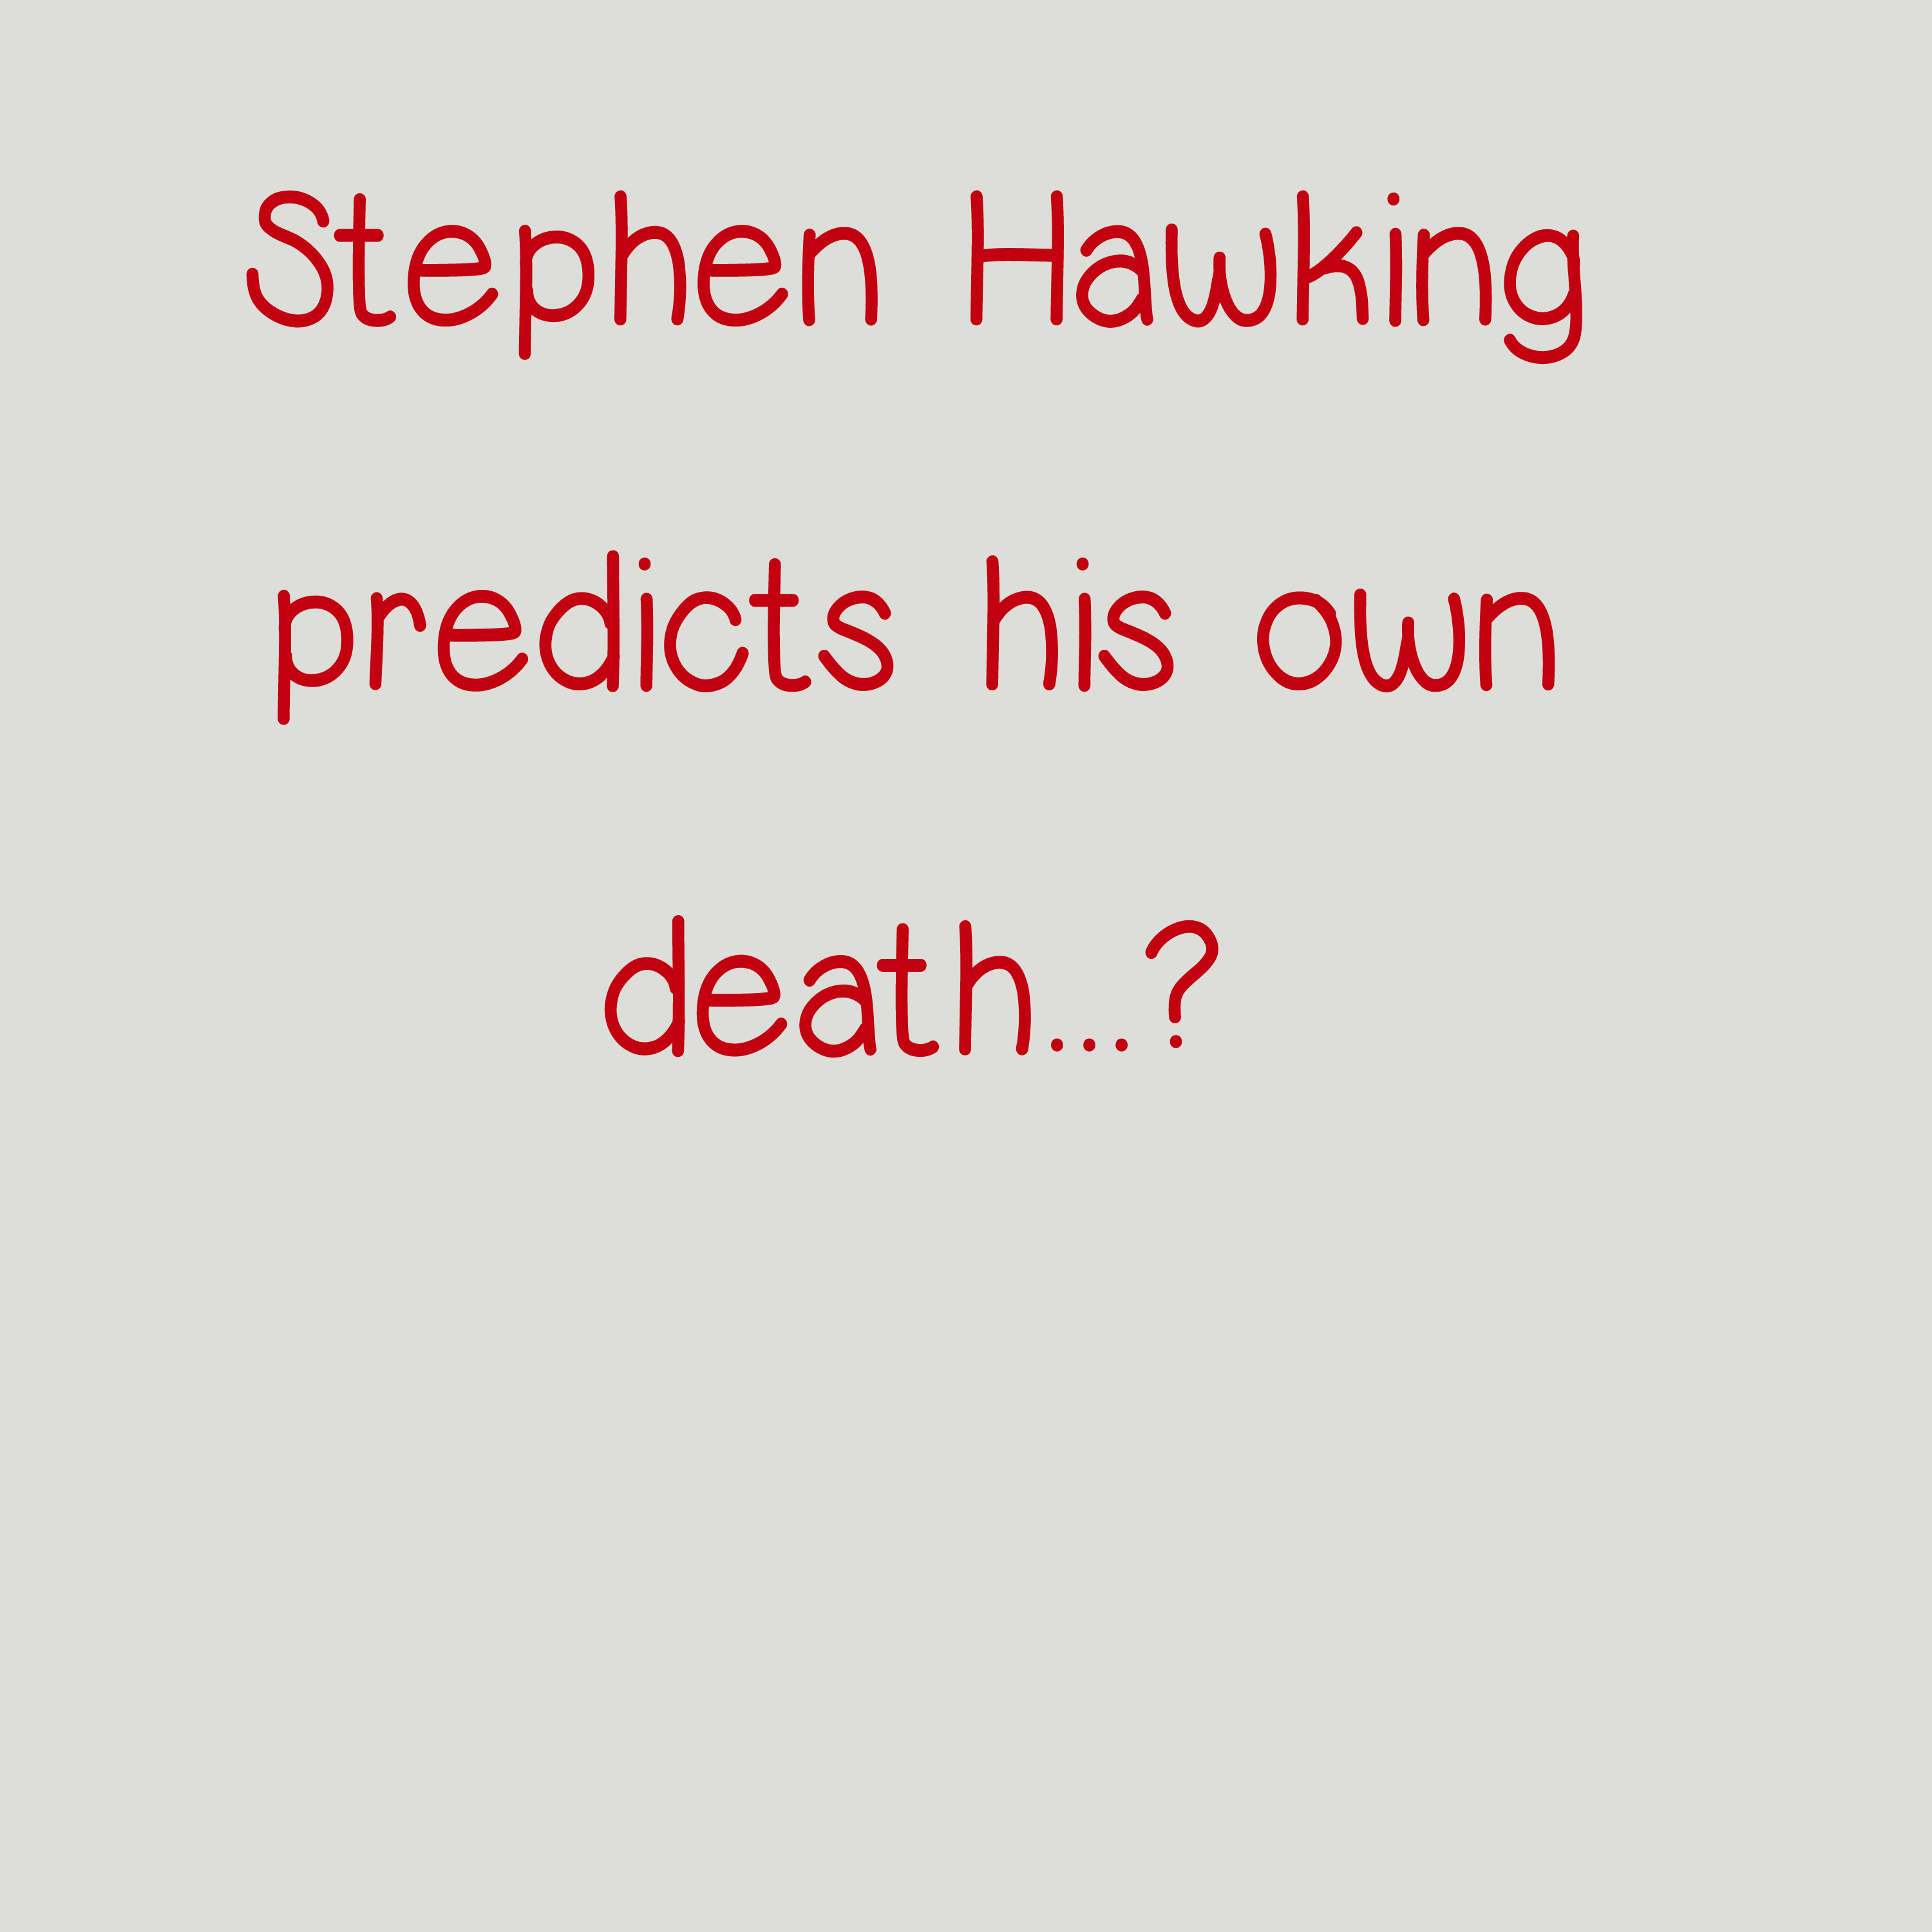 Stephen Hawing predicts his own death?